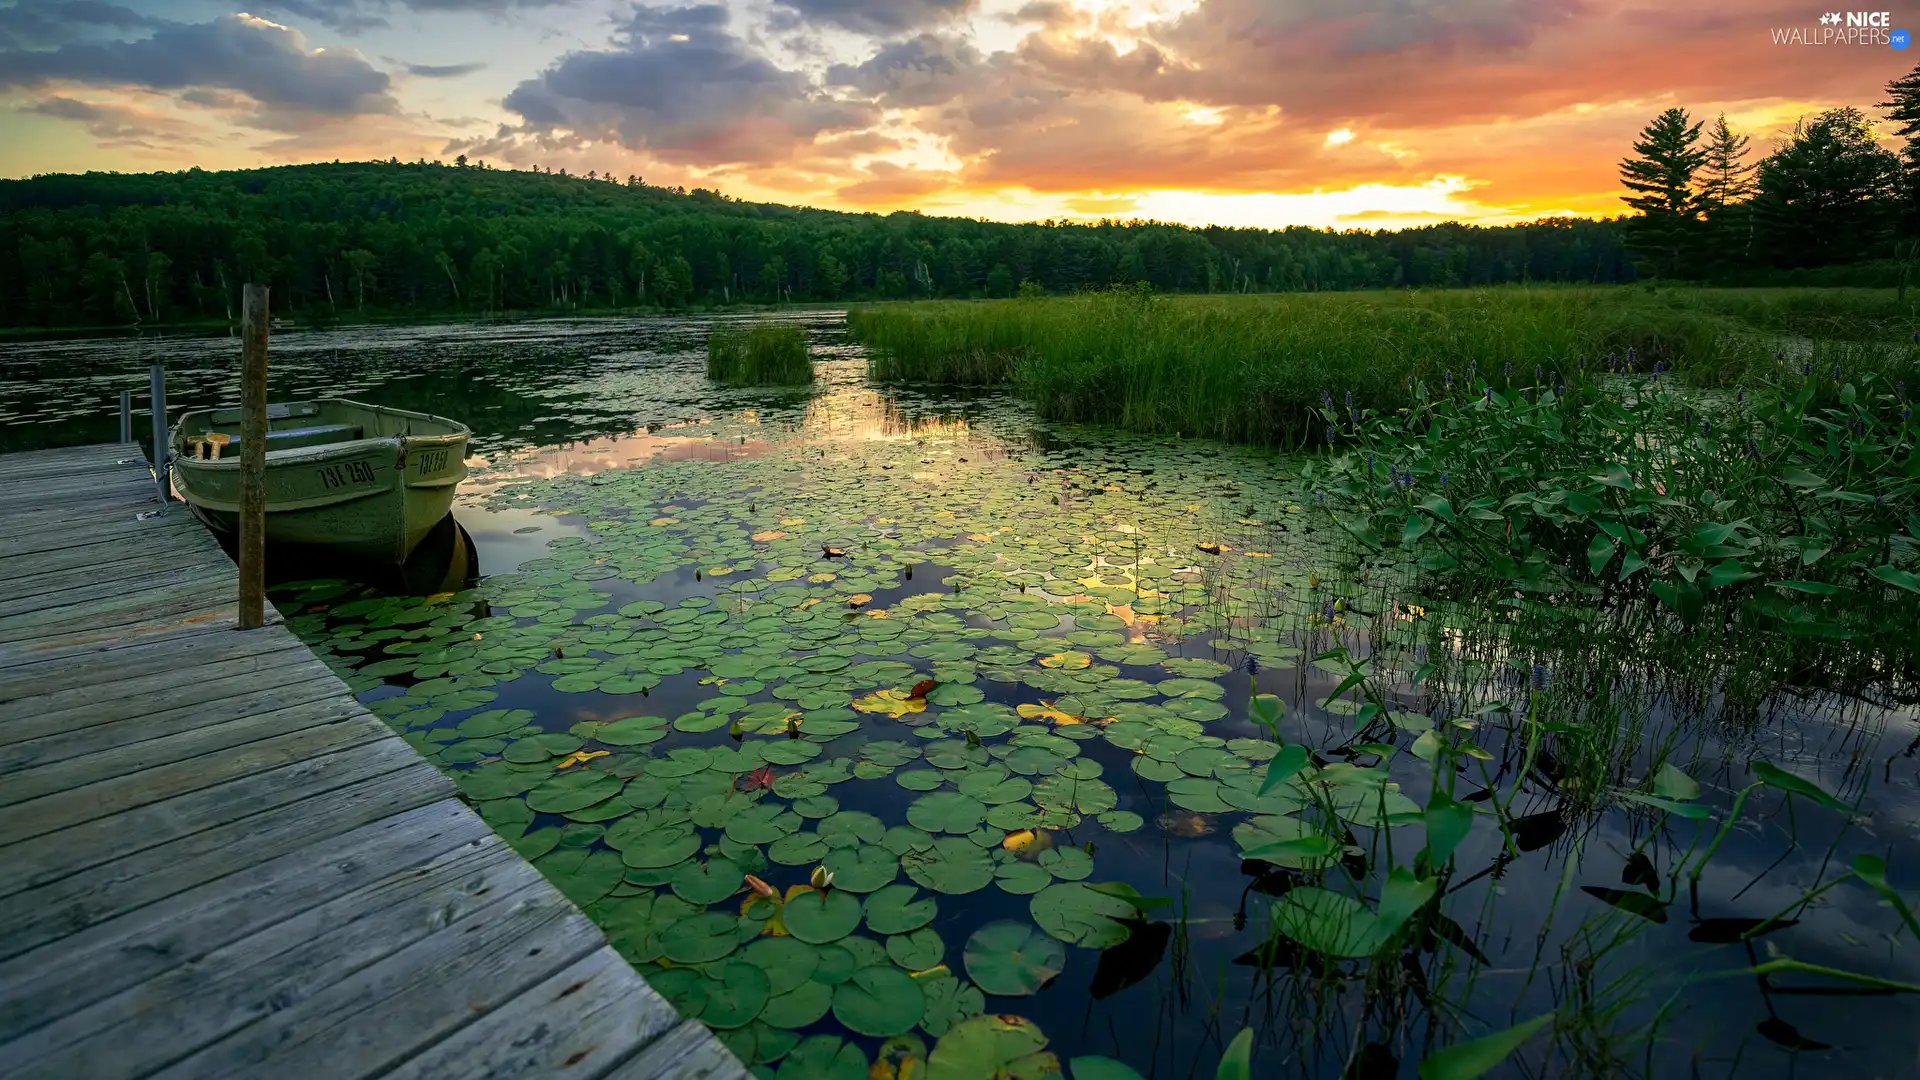 trees, Boat, Leaf, clouds, Water lilies, Platform, Pond - car, Great Sunsets, viewes, grass